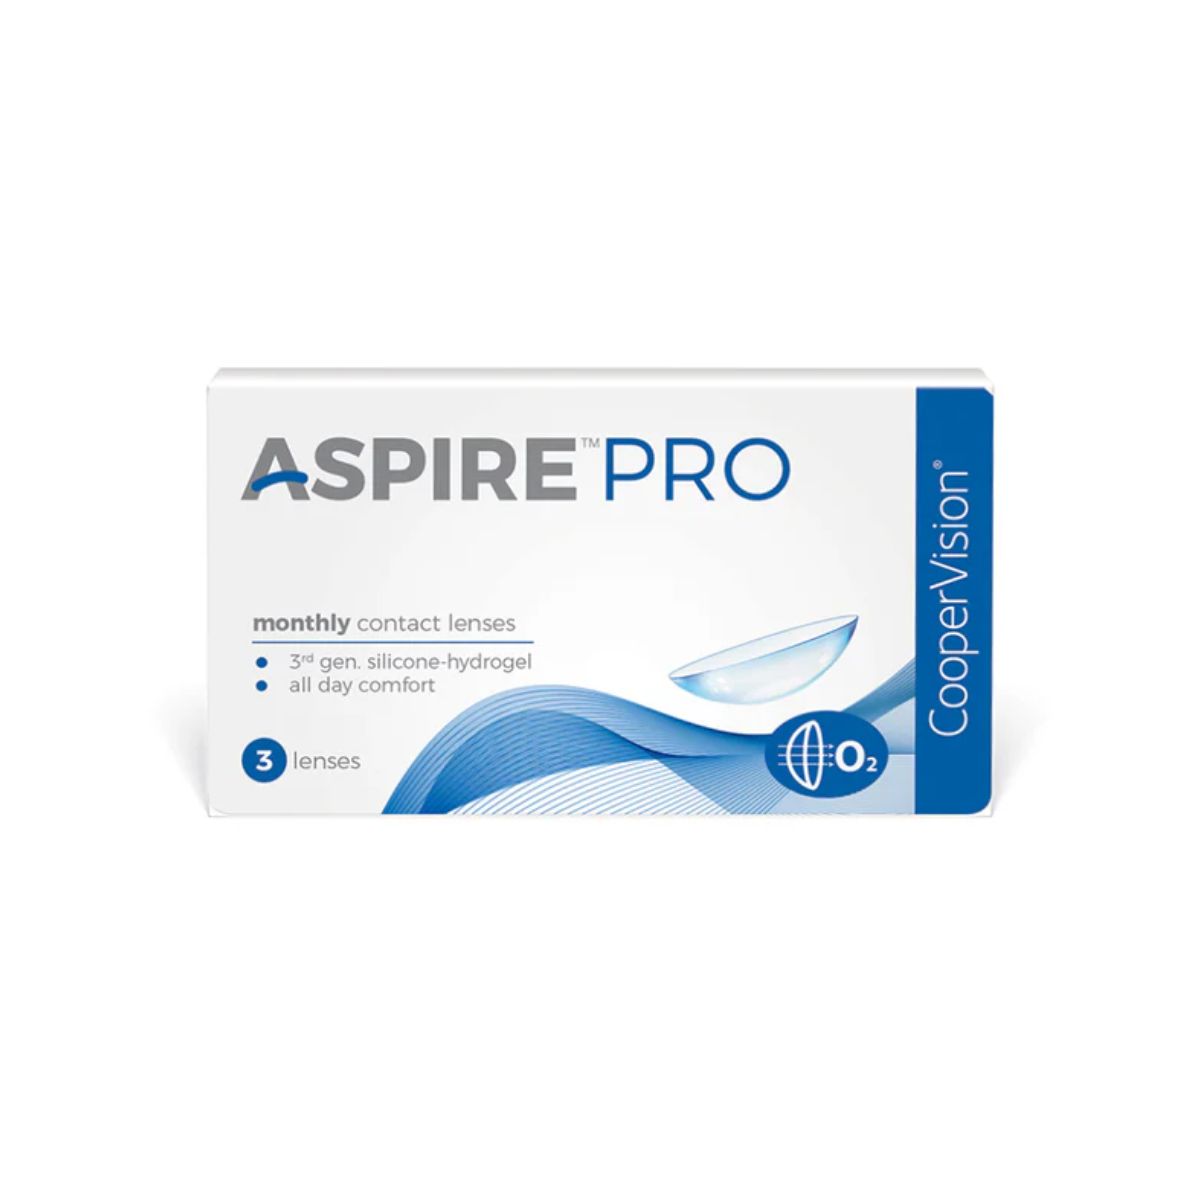 "Clear Vision & Comfort with Aspire Pro Monthly Contact Lenses"